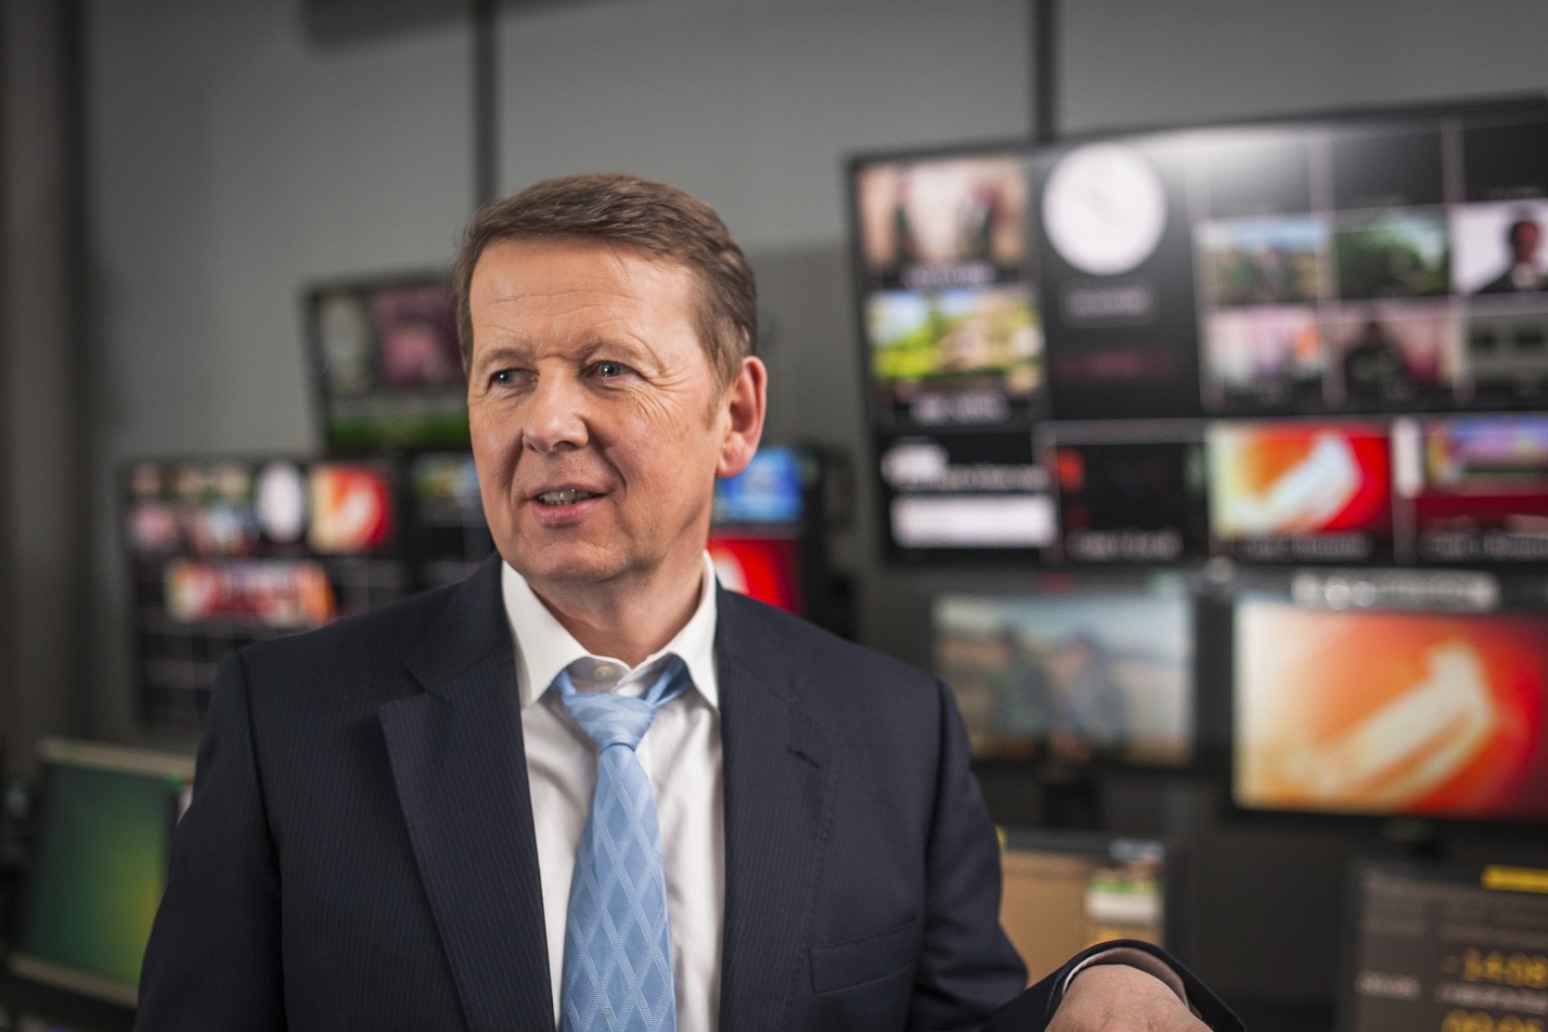 Bill Turnbull ‘lived by high standards’ and encouraged others to do the same 